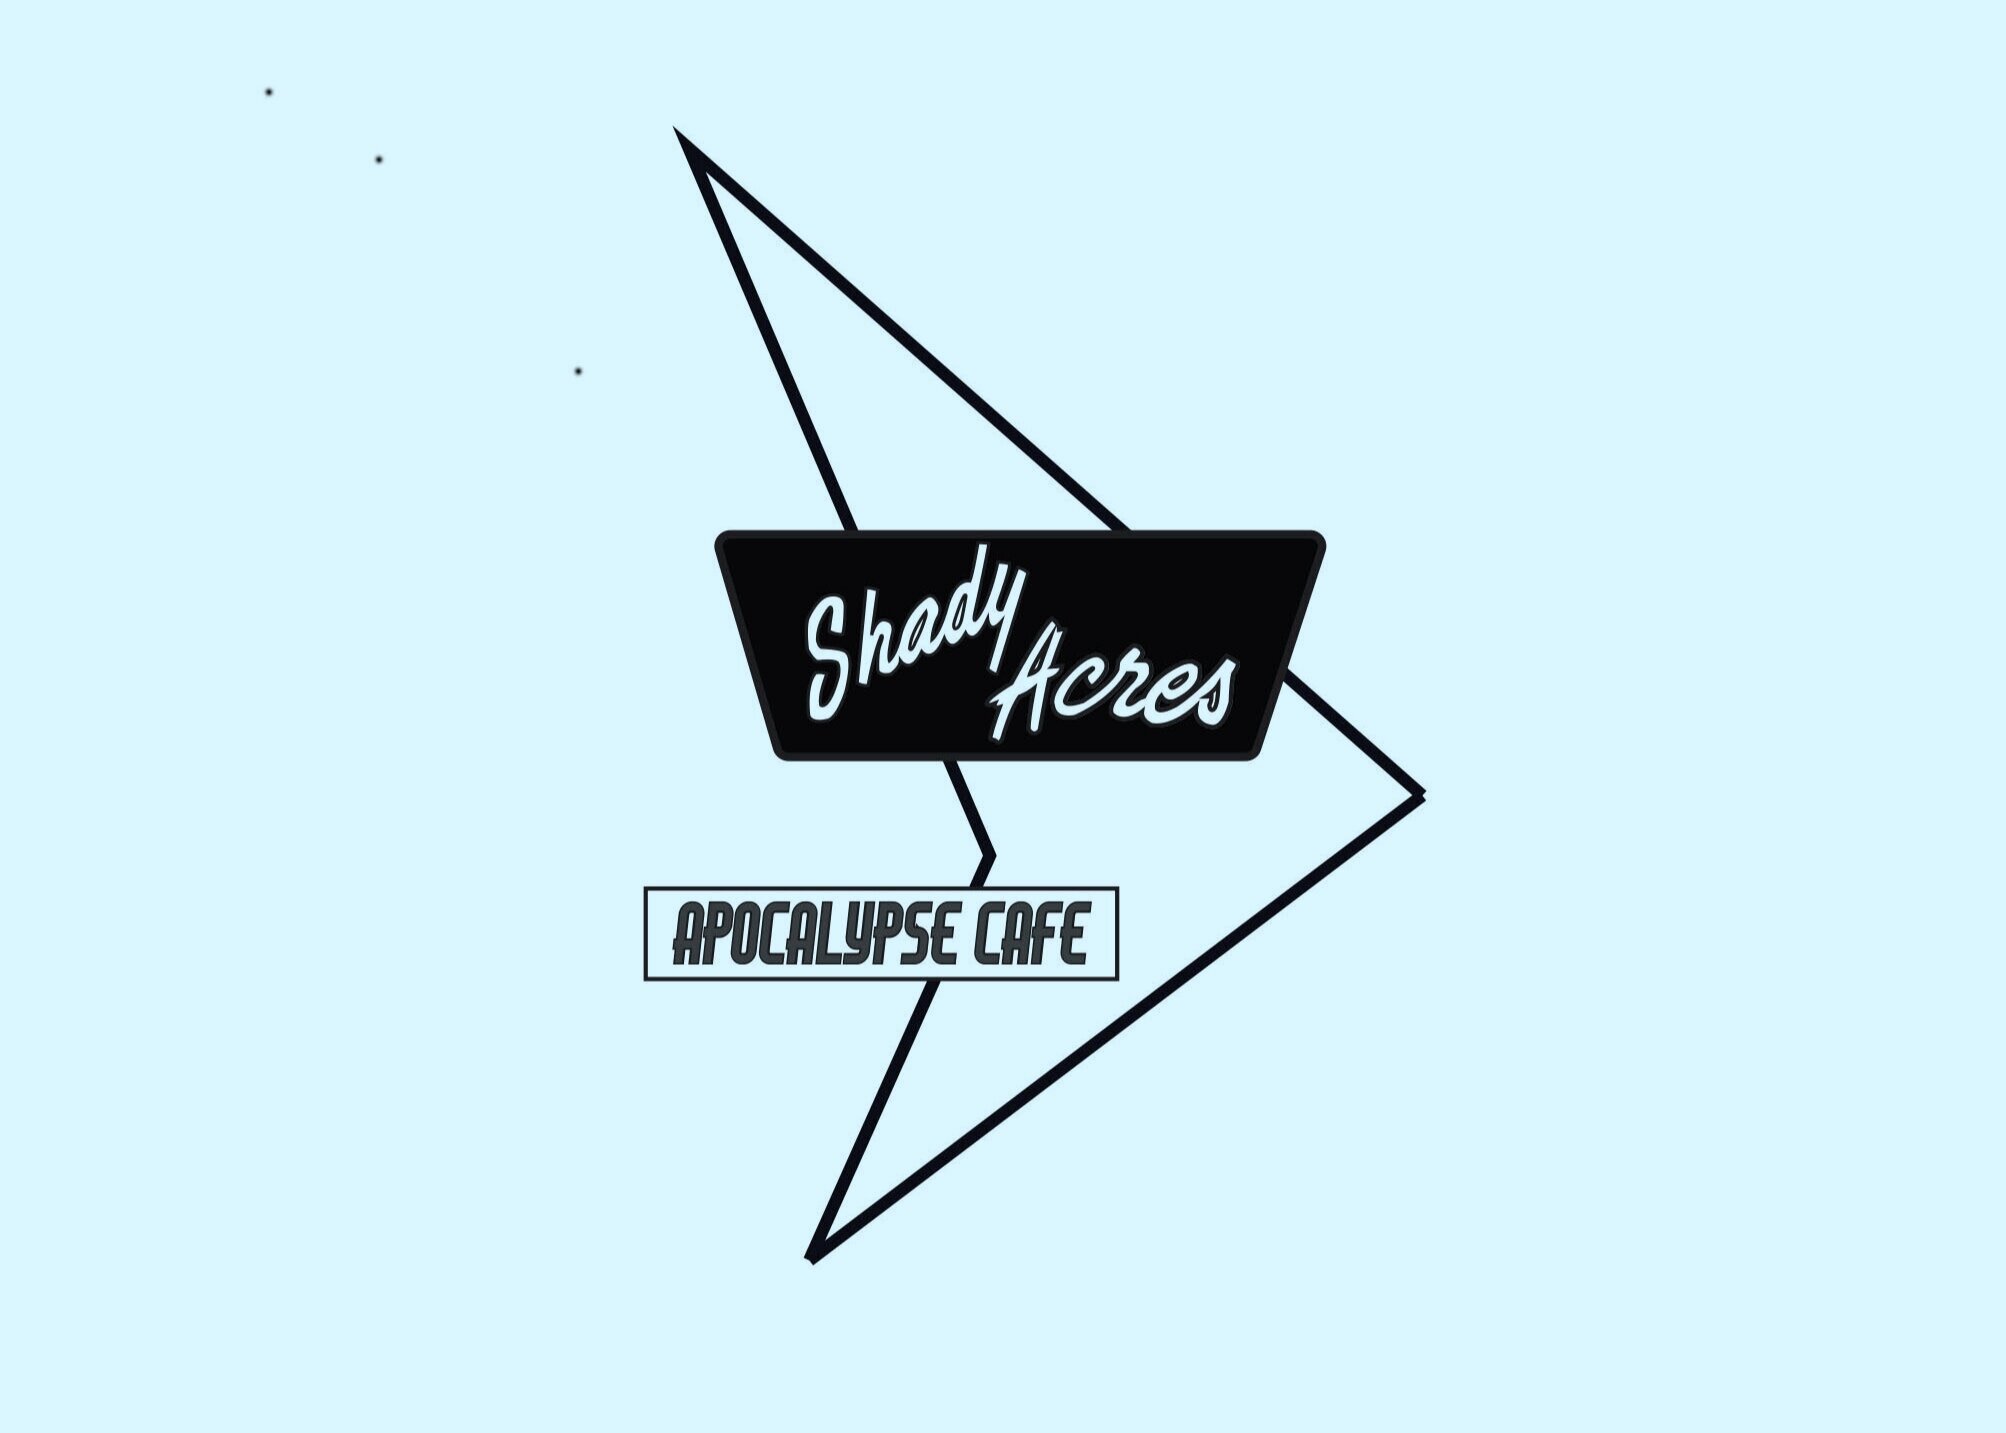 Shady Acres Diner